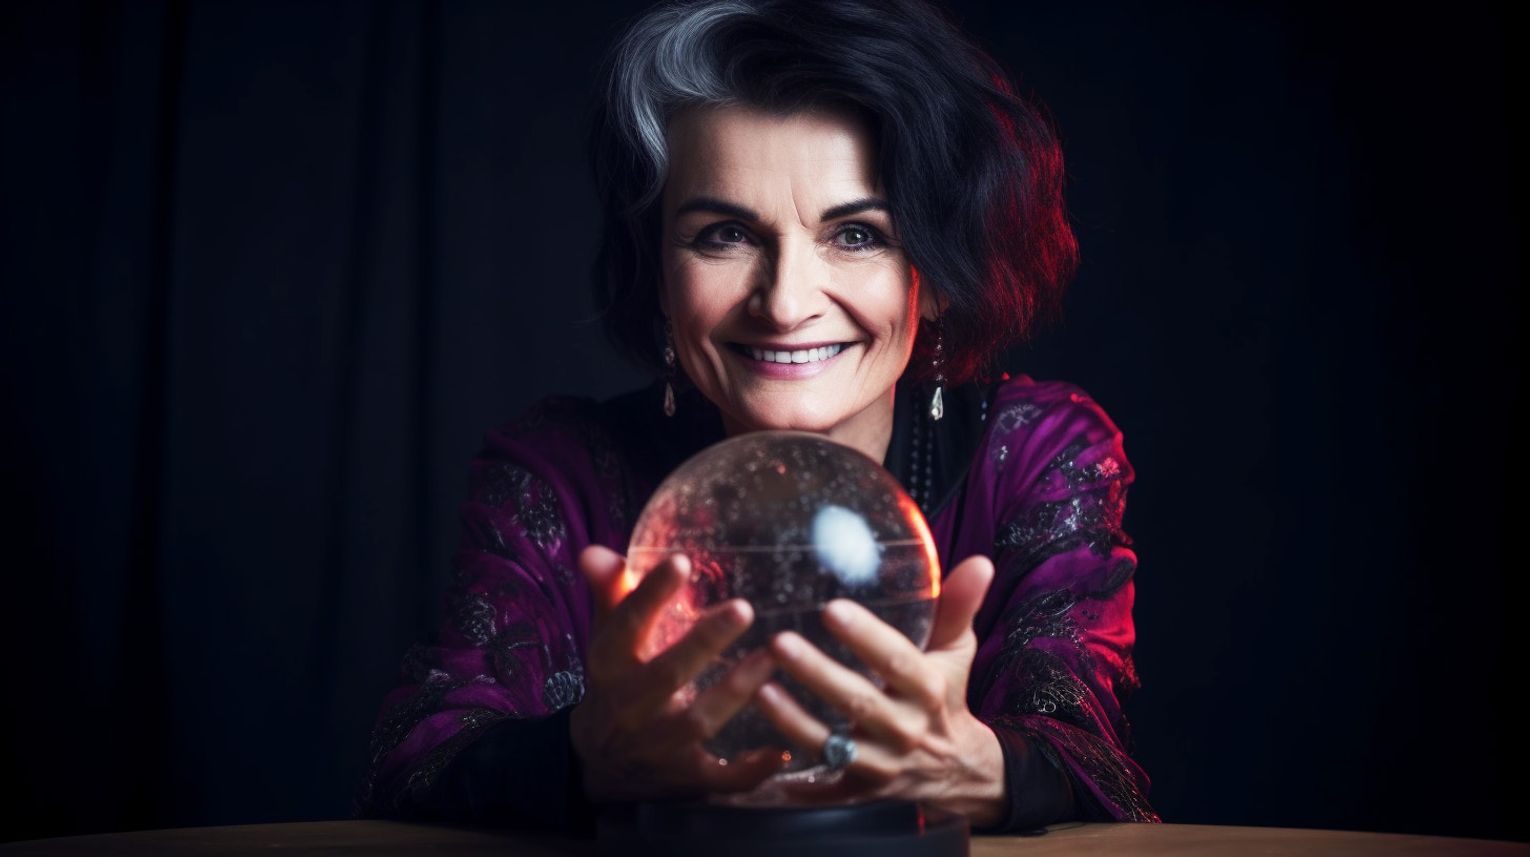 A psychic reader holding a crystal ball